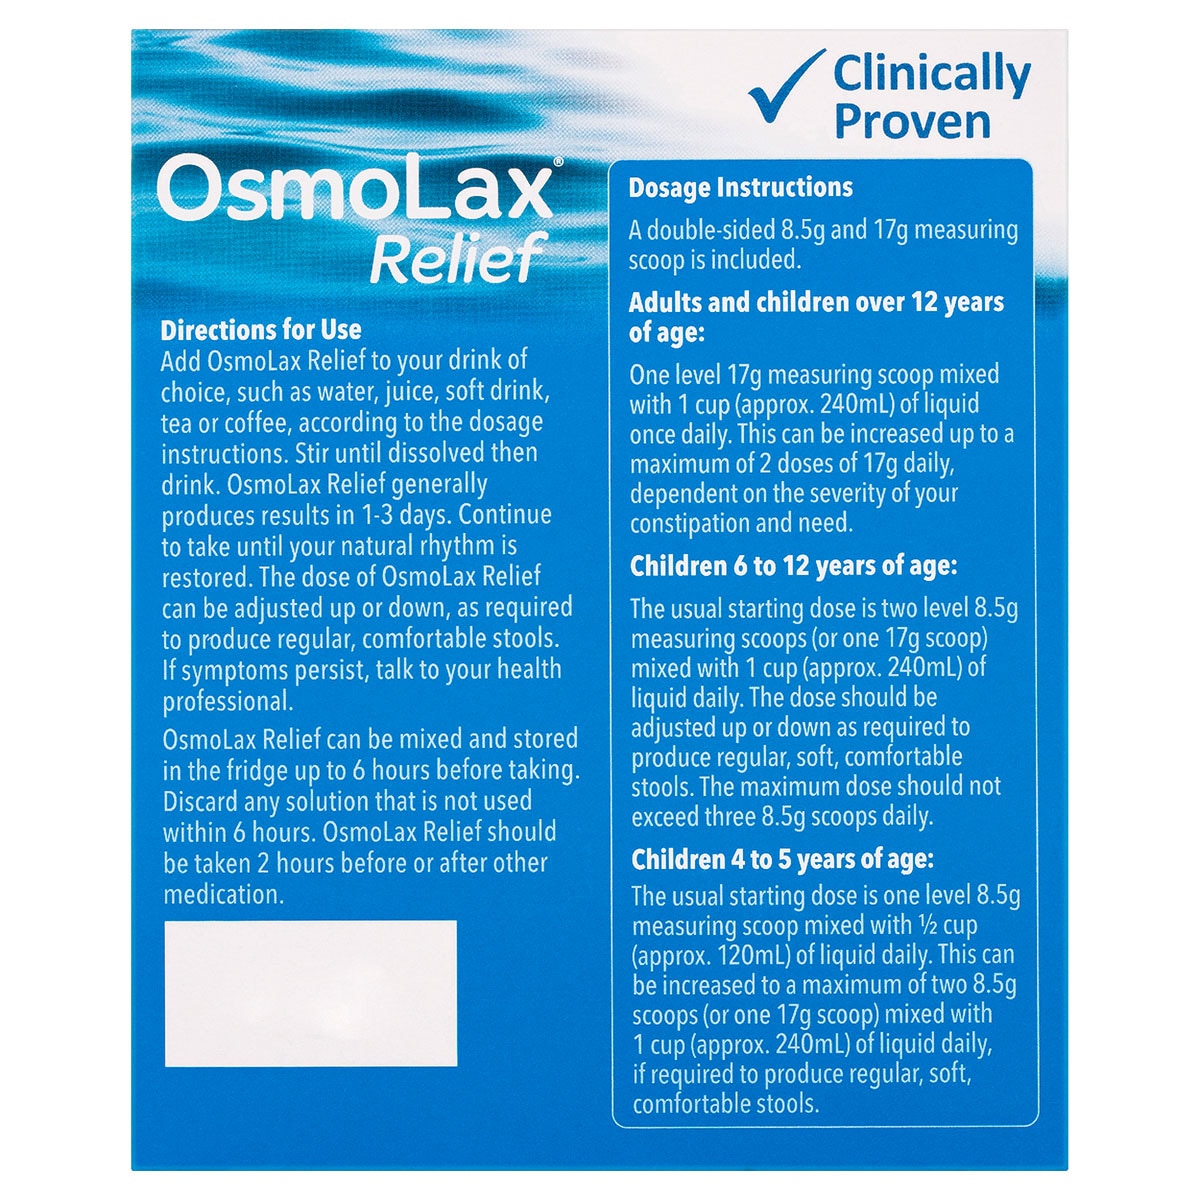 OsmoLax Relief 35 Doses 595g